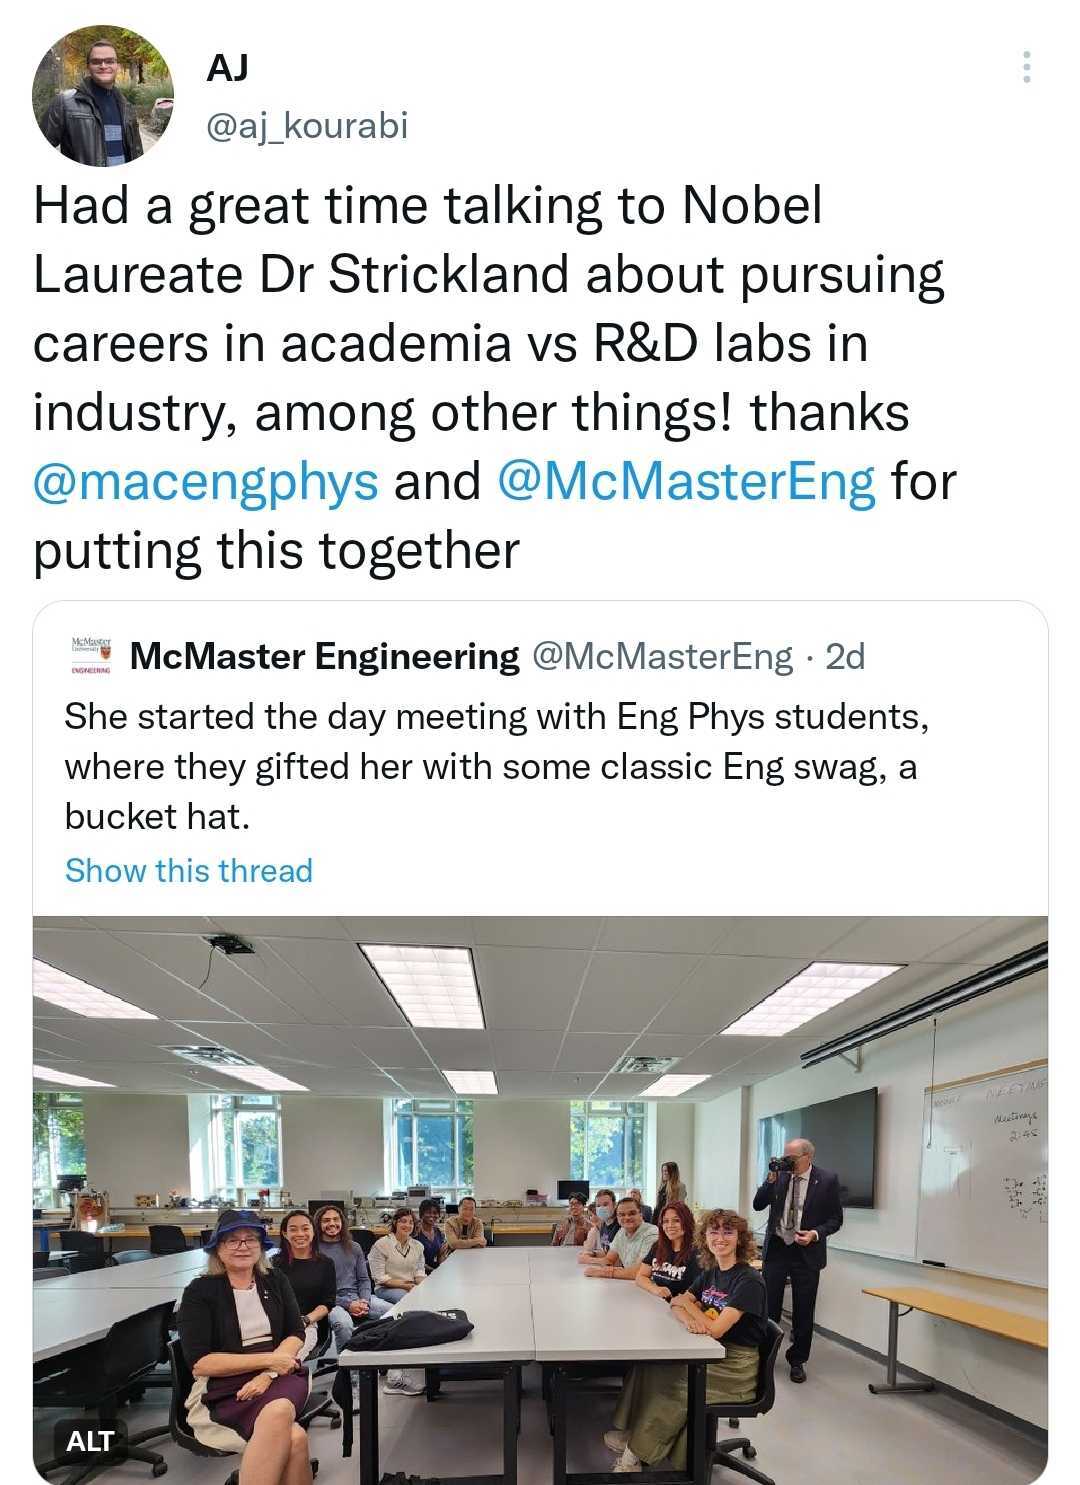 Tweet by Aj, a student, about meeting Donna Strickland